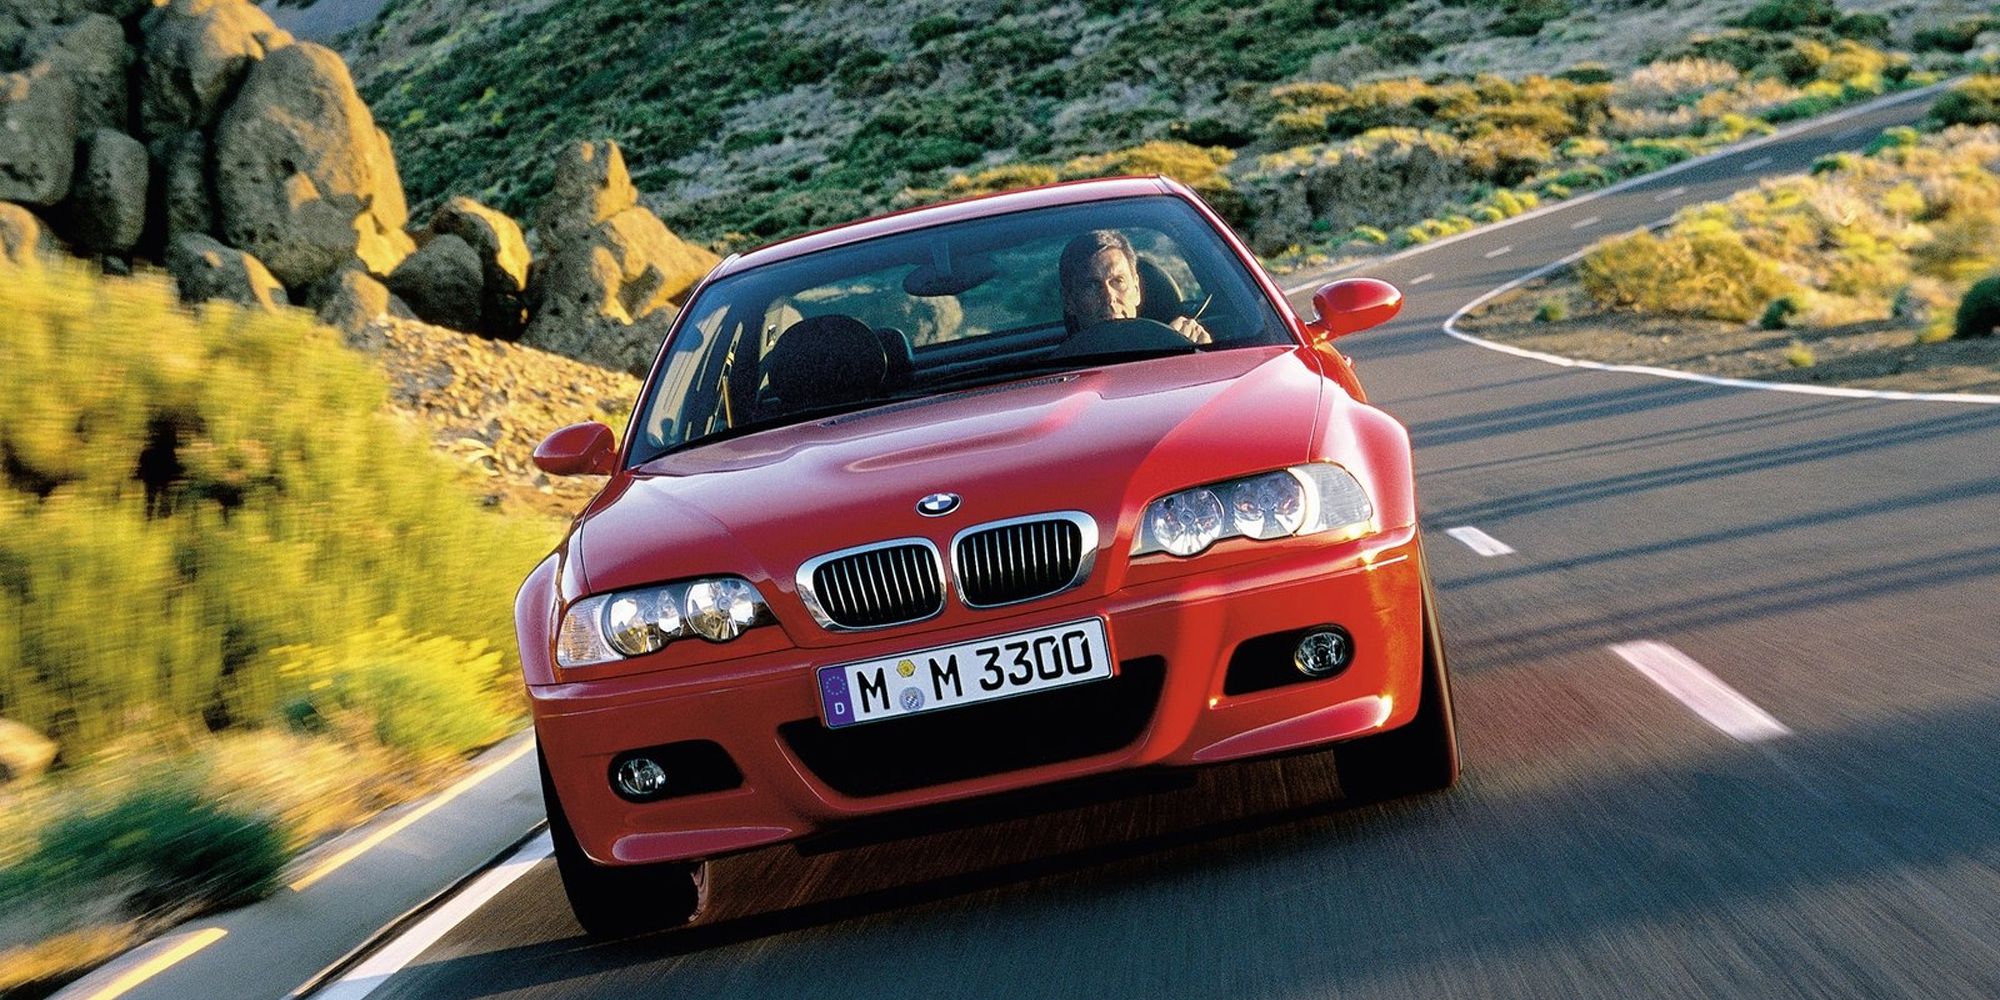 The front of an E46 M3 on the move